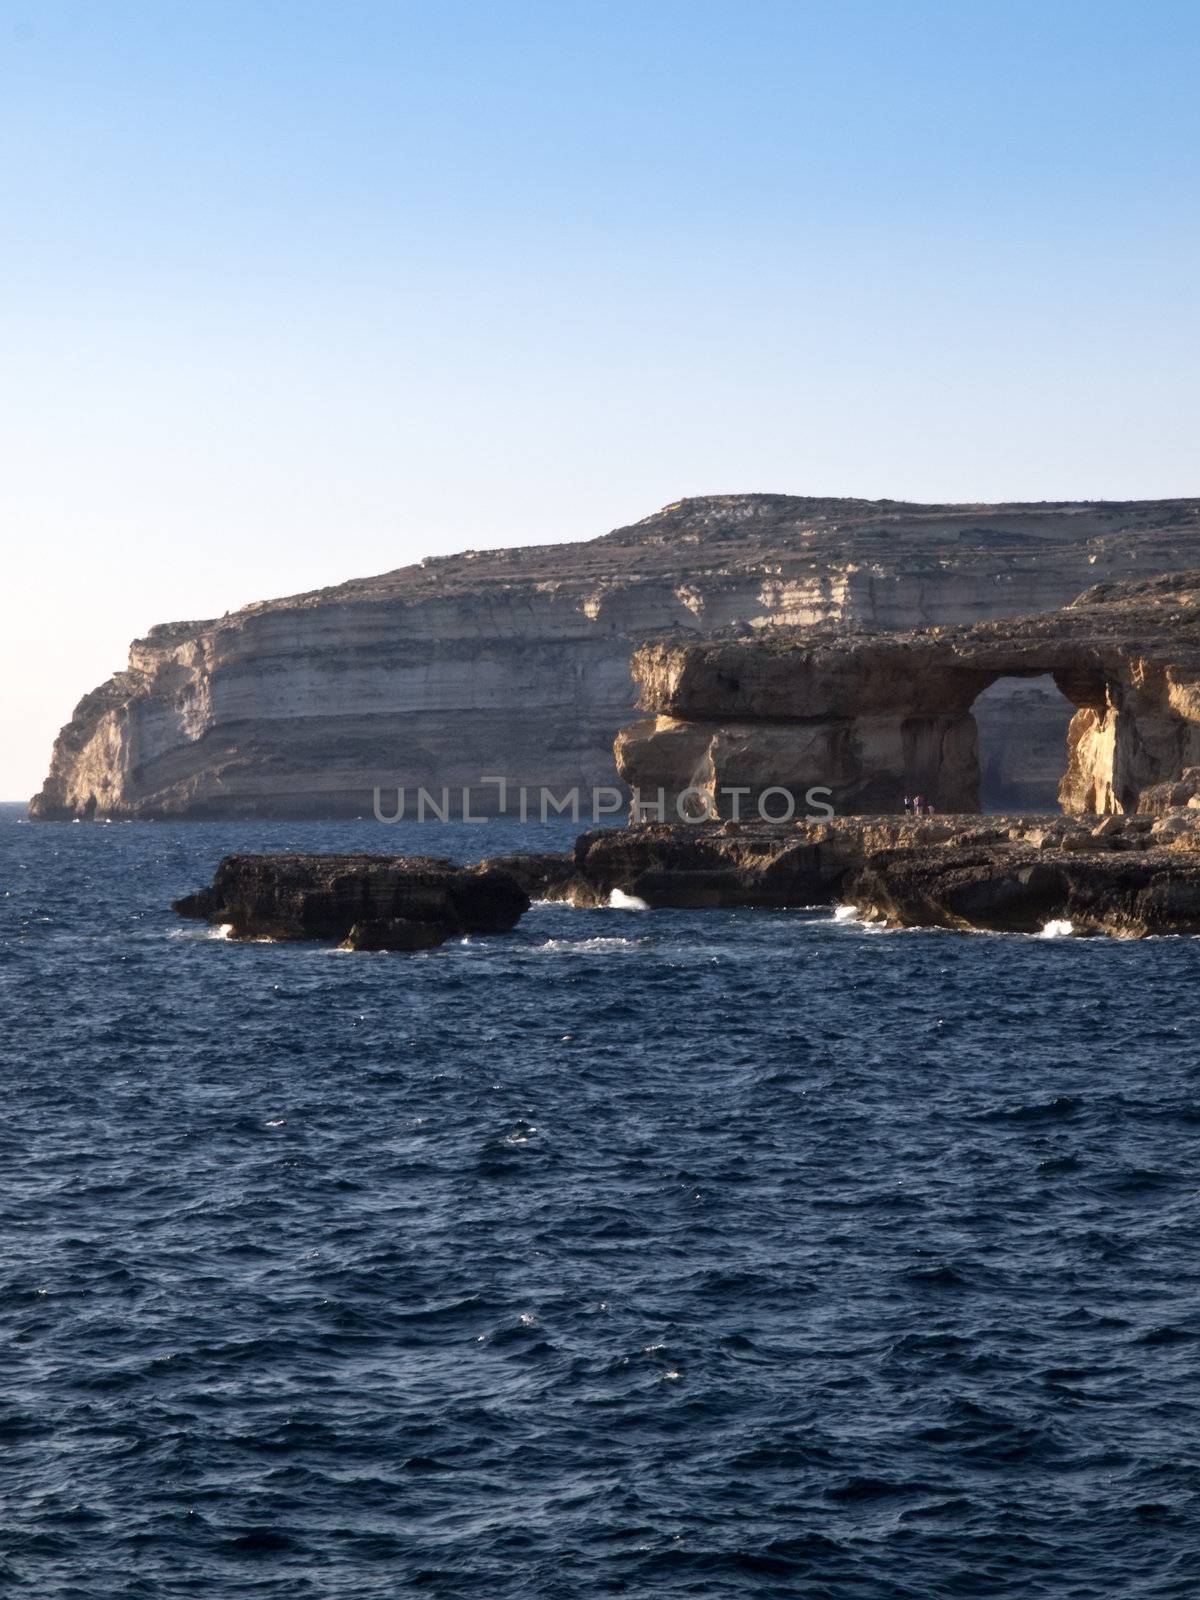 A seascape from Dwejra in Gozo showing the Azure Window